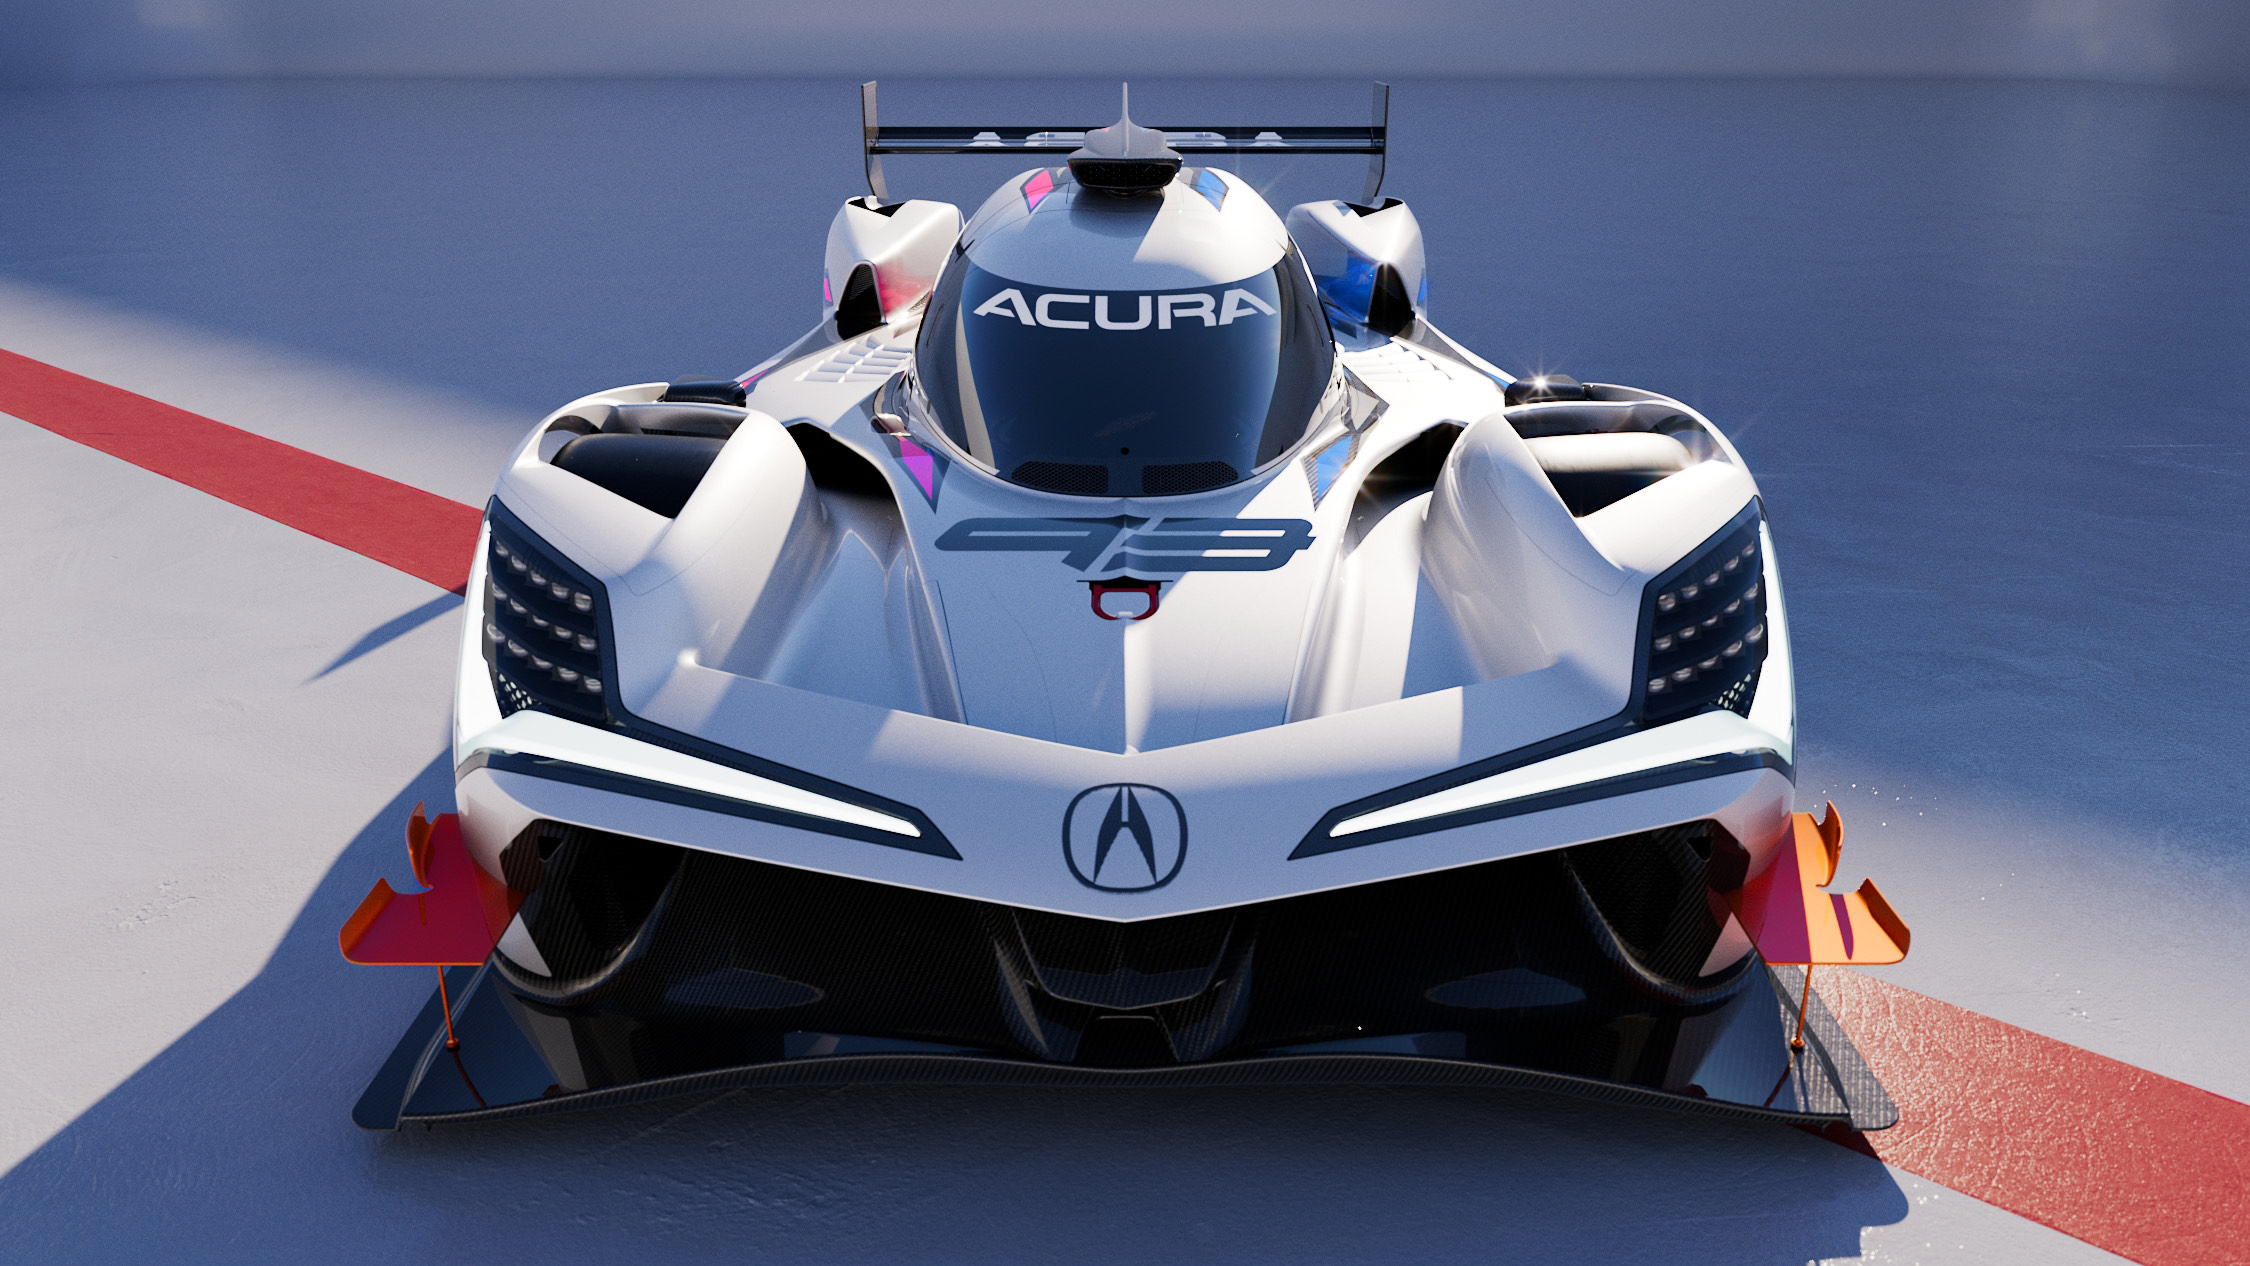 Acura Arx-01 Wallpapers